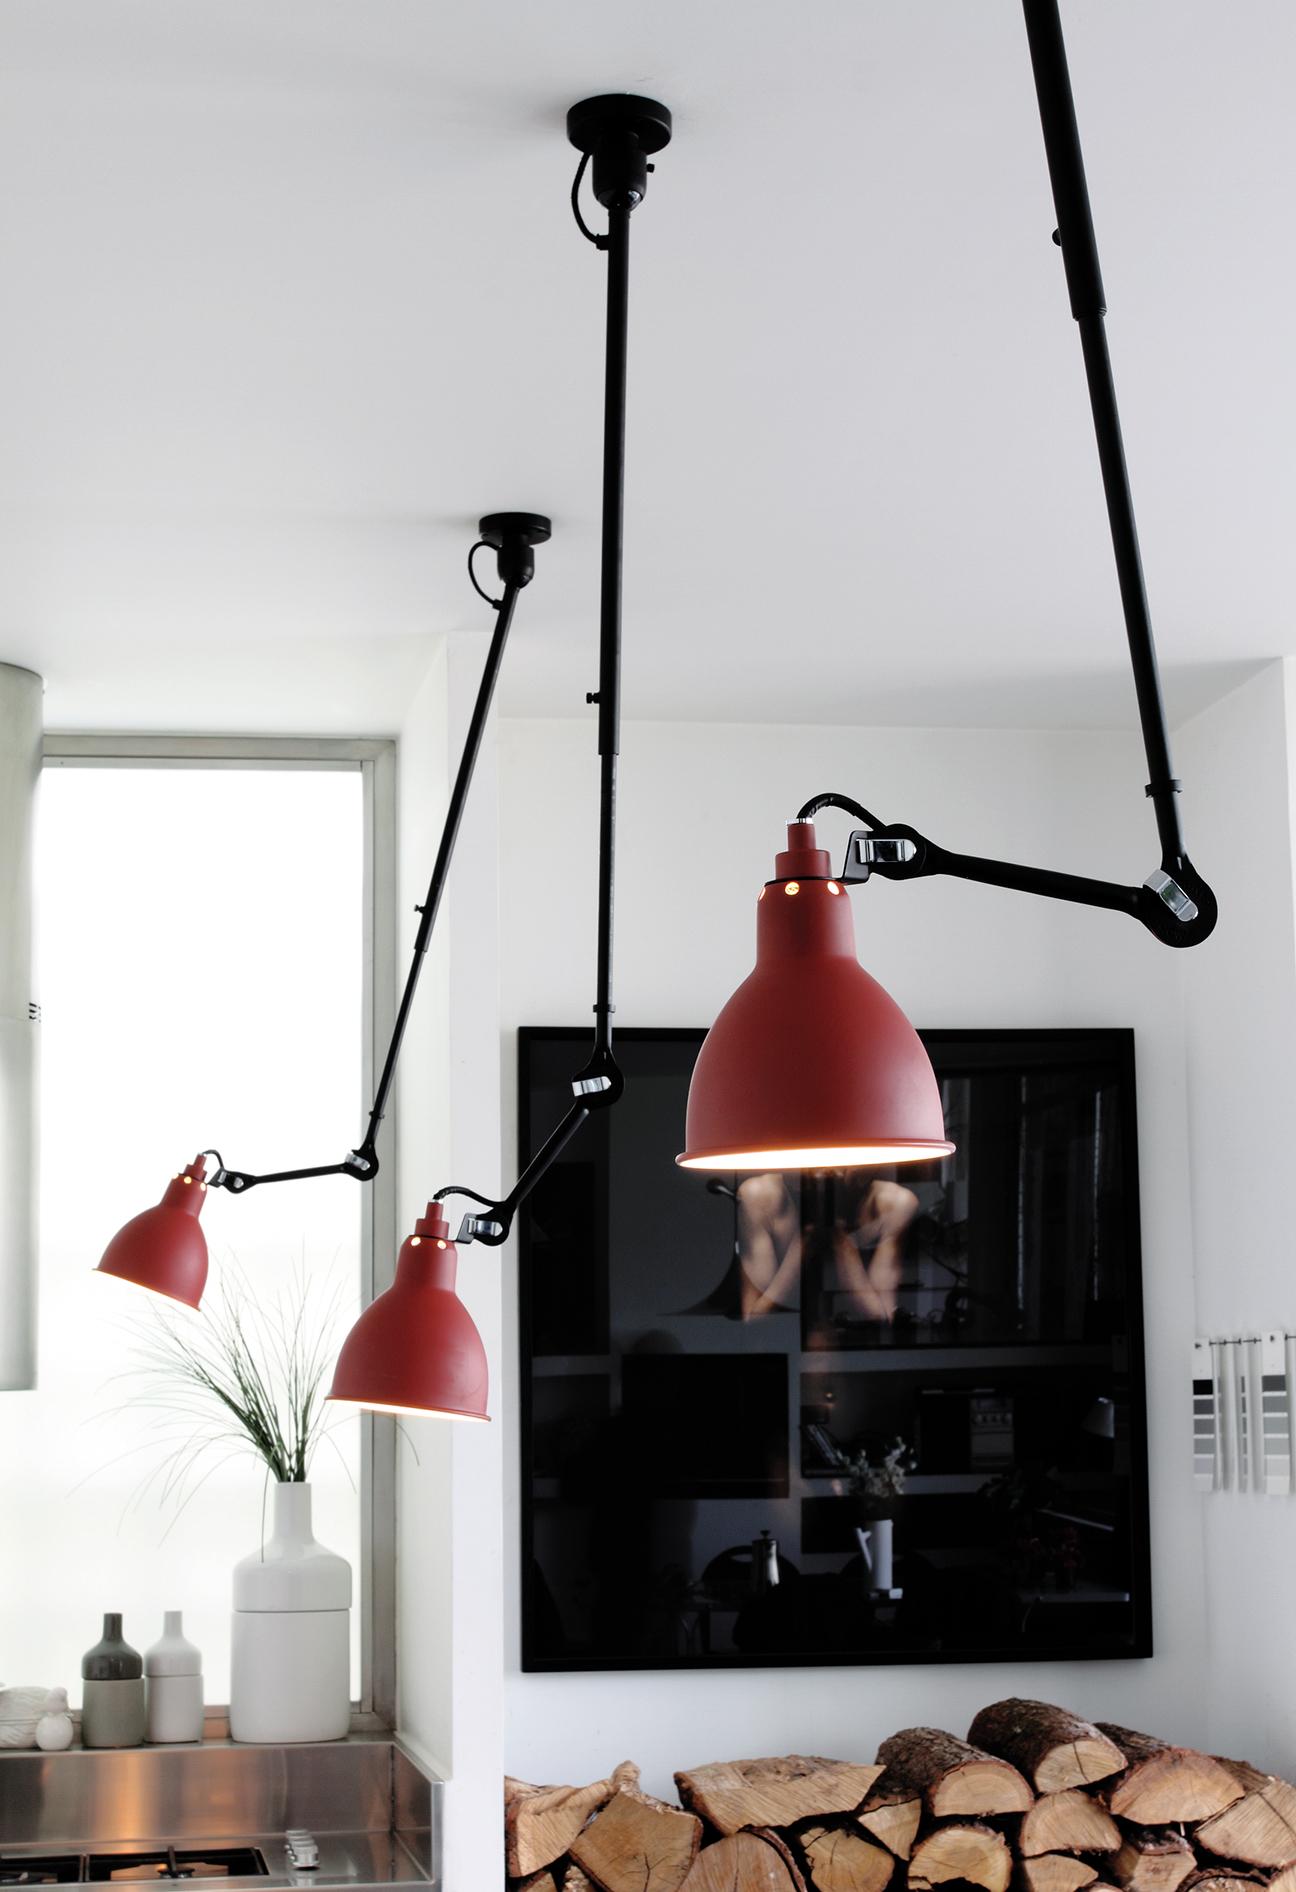 Steel DCW Editions La Lampe Gras N°302 Pendant Light in Black Arm and Raw Copper Shade For Sale